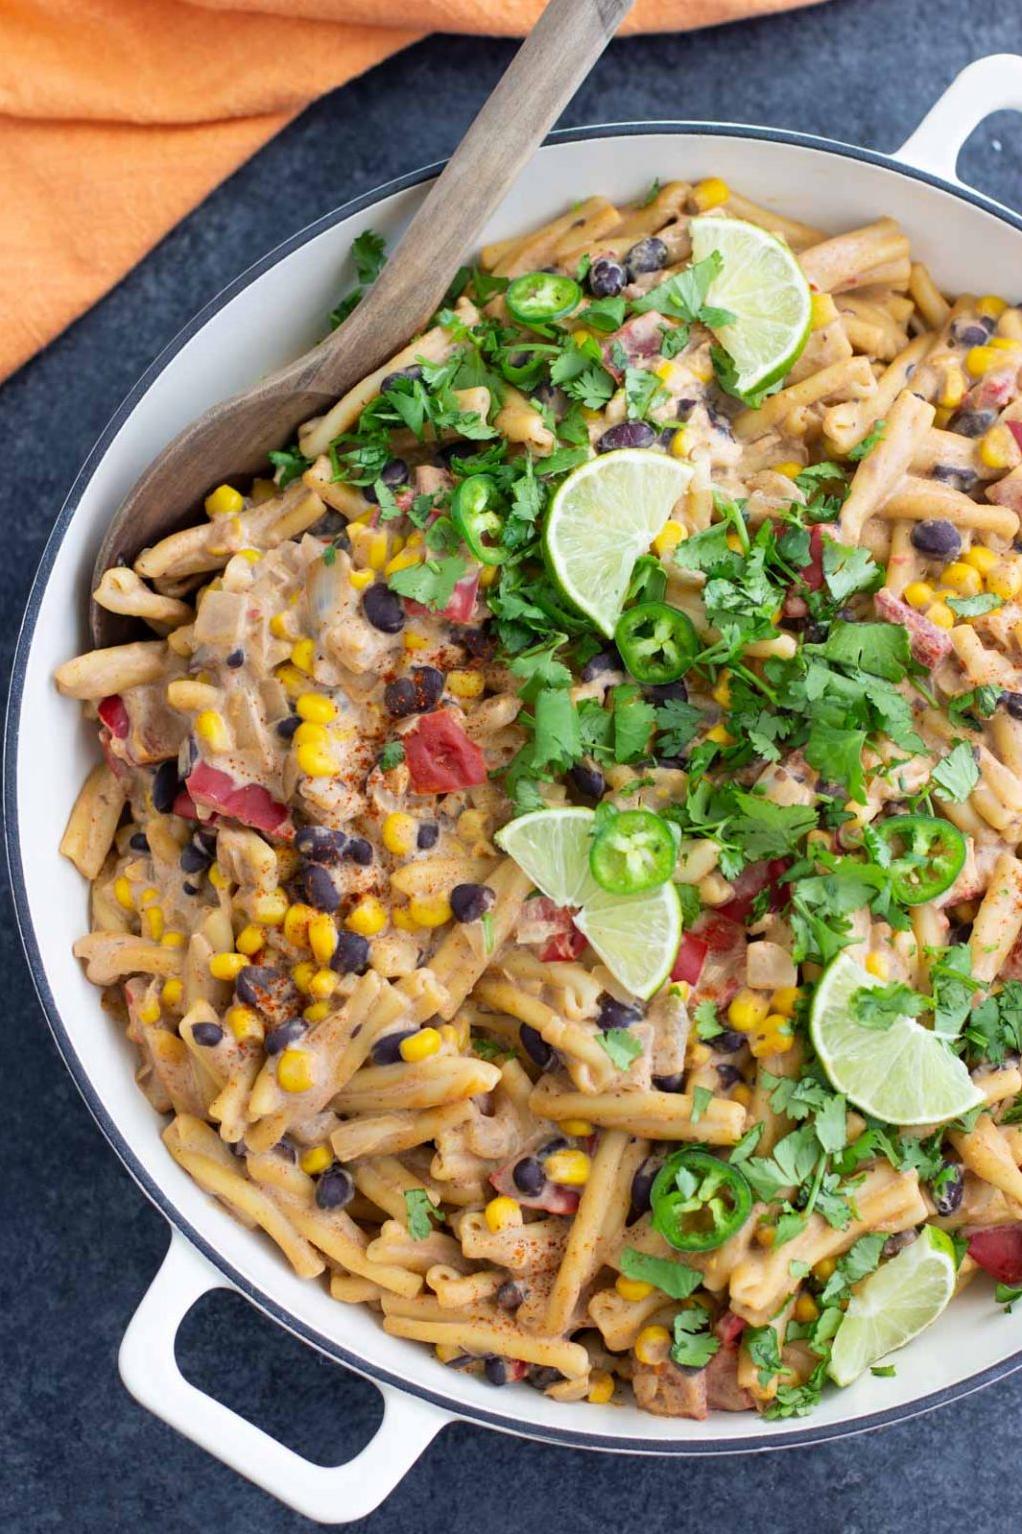  Looking for a salad that's a little different from average? Try our taco pasta salad!